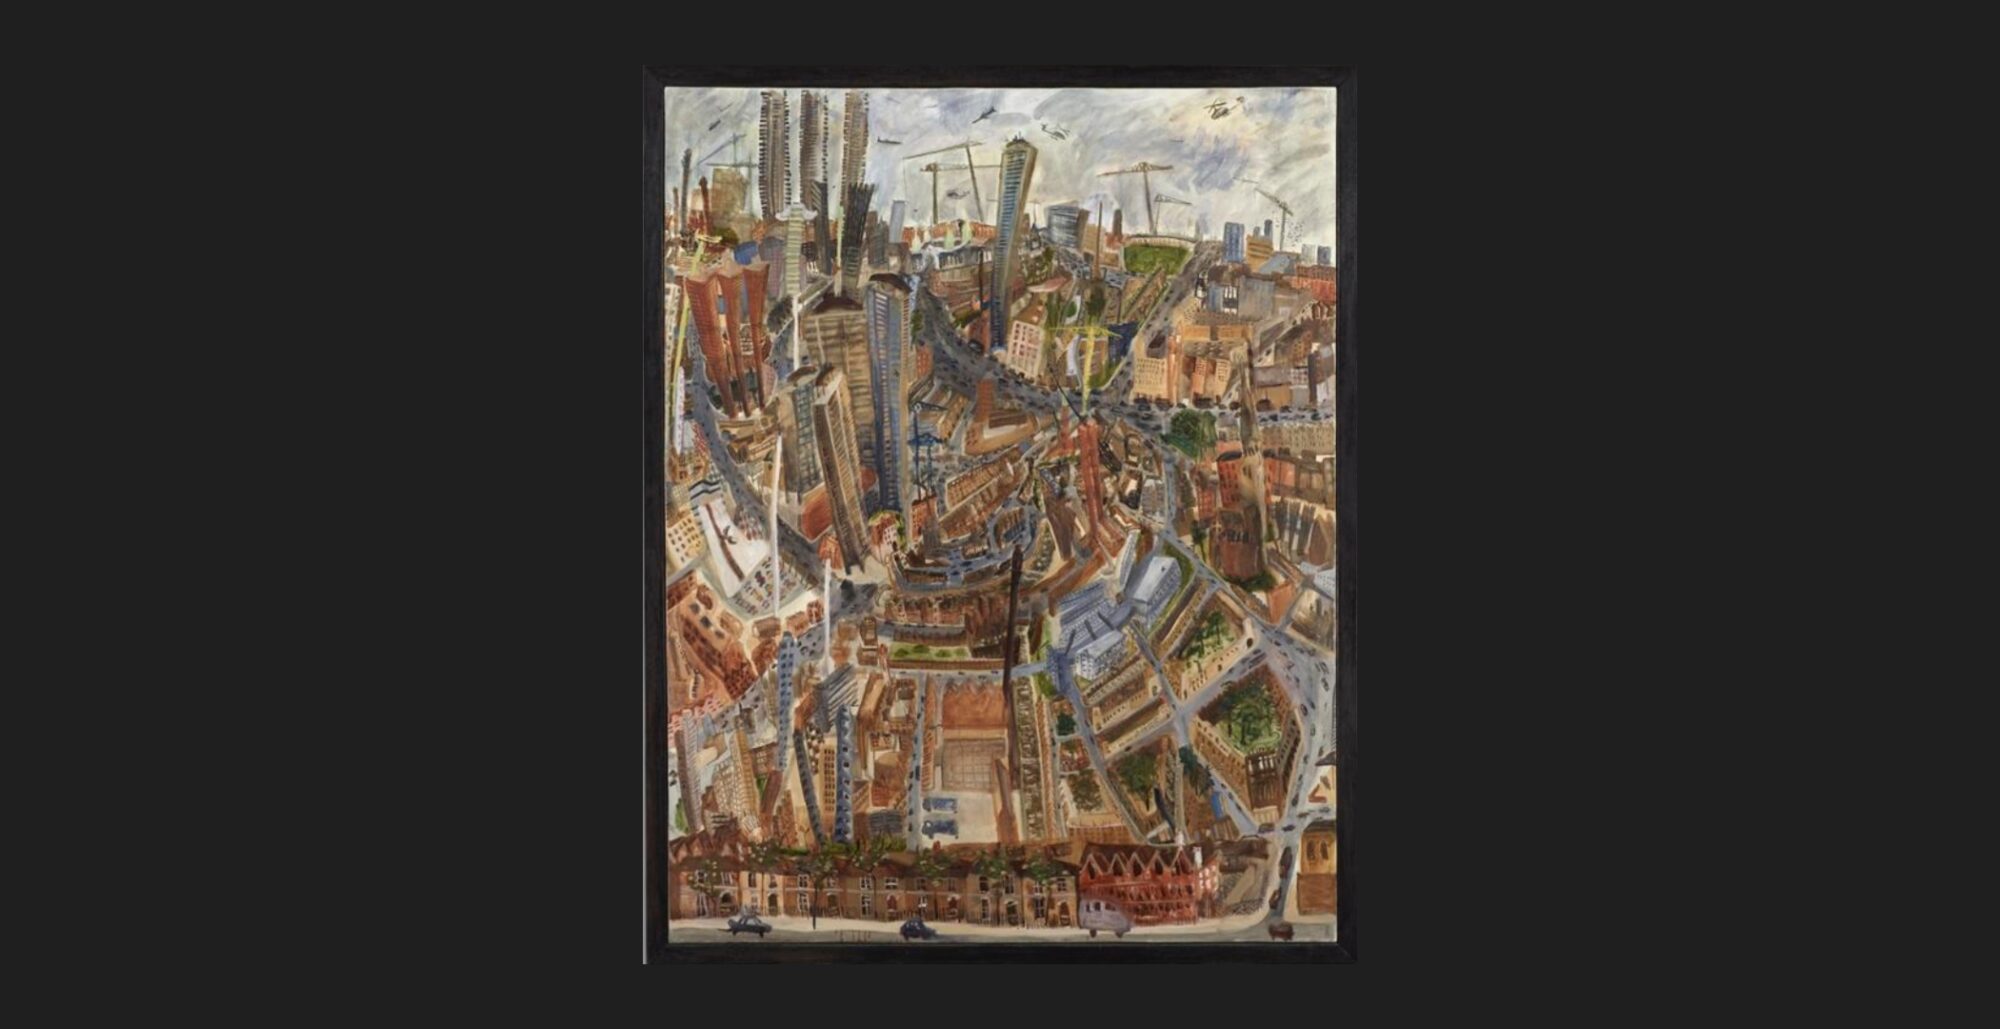 'View from Rotherfield Street to the Barbican', Sharon Beavan (1989)